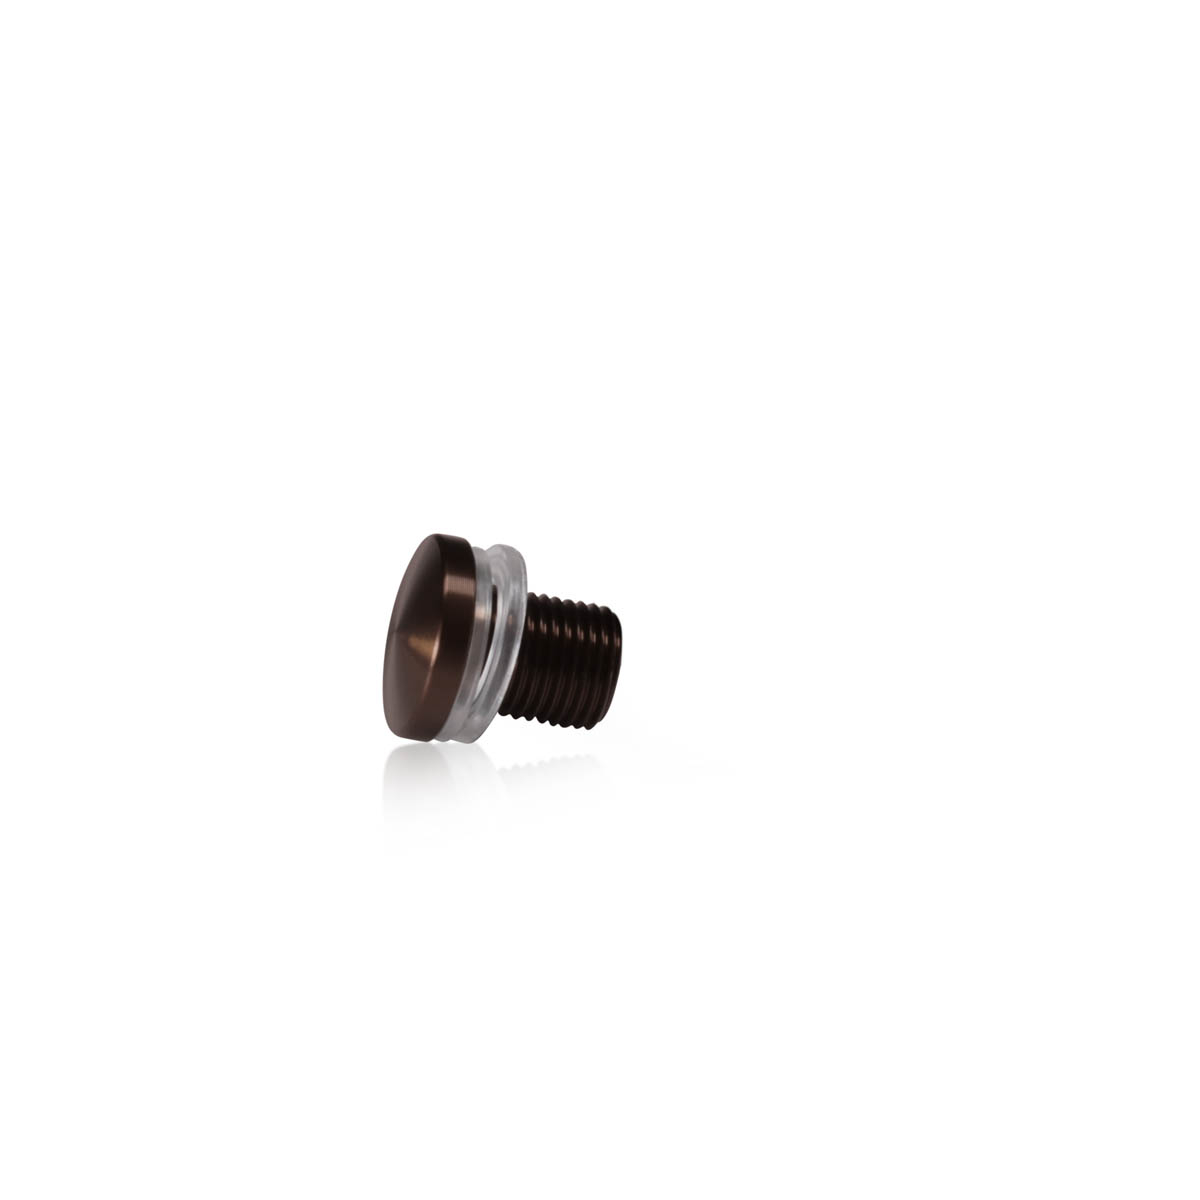 AL16-12AB Head replacement for Mbs-Standoffs 5/8'' Diameter x 1/2'' Barrel Length, Aluminum Bronze Anodized Finish Standoffs (Includes 2 Silicone Washers).